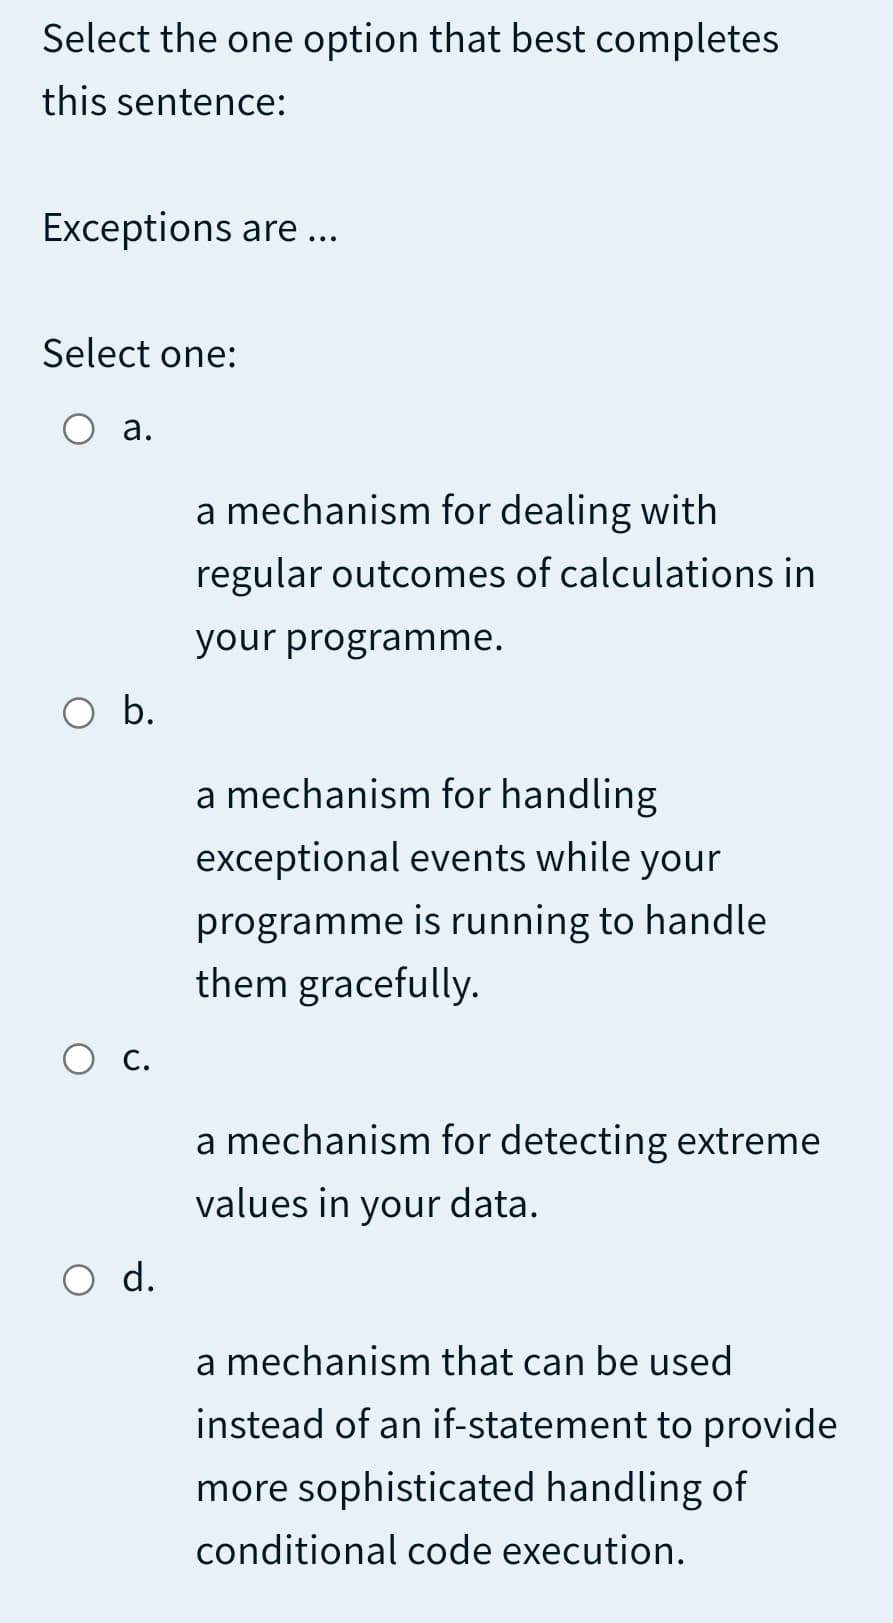 Select the one option that best completes
this sentence:
Exceptions are ...
Select one:
O a.
a mechanism for dealing with
regular outcomes of calculations in
your programme.
Ob.
a mechanism for handling
exceptional events while your
programme is running to handle
them gracefully.
Ос.
a mechanism for detecting extreme
values in your data.
d.
a mechanism that can be used
instead of an if-statement to provide
more sophisticated handling of
conditional code execution.
